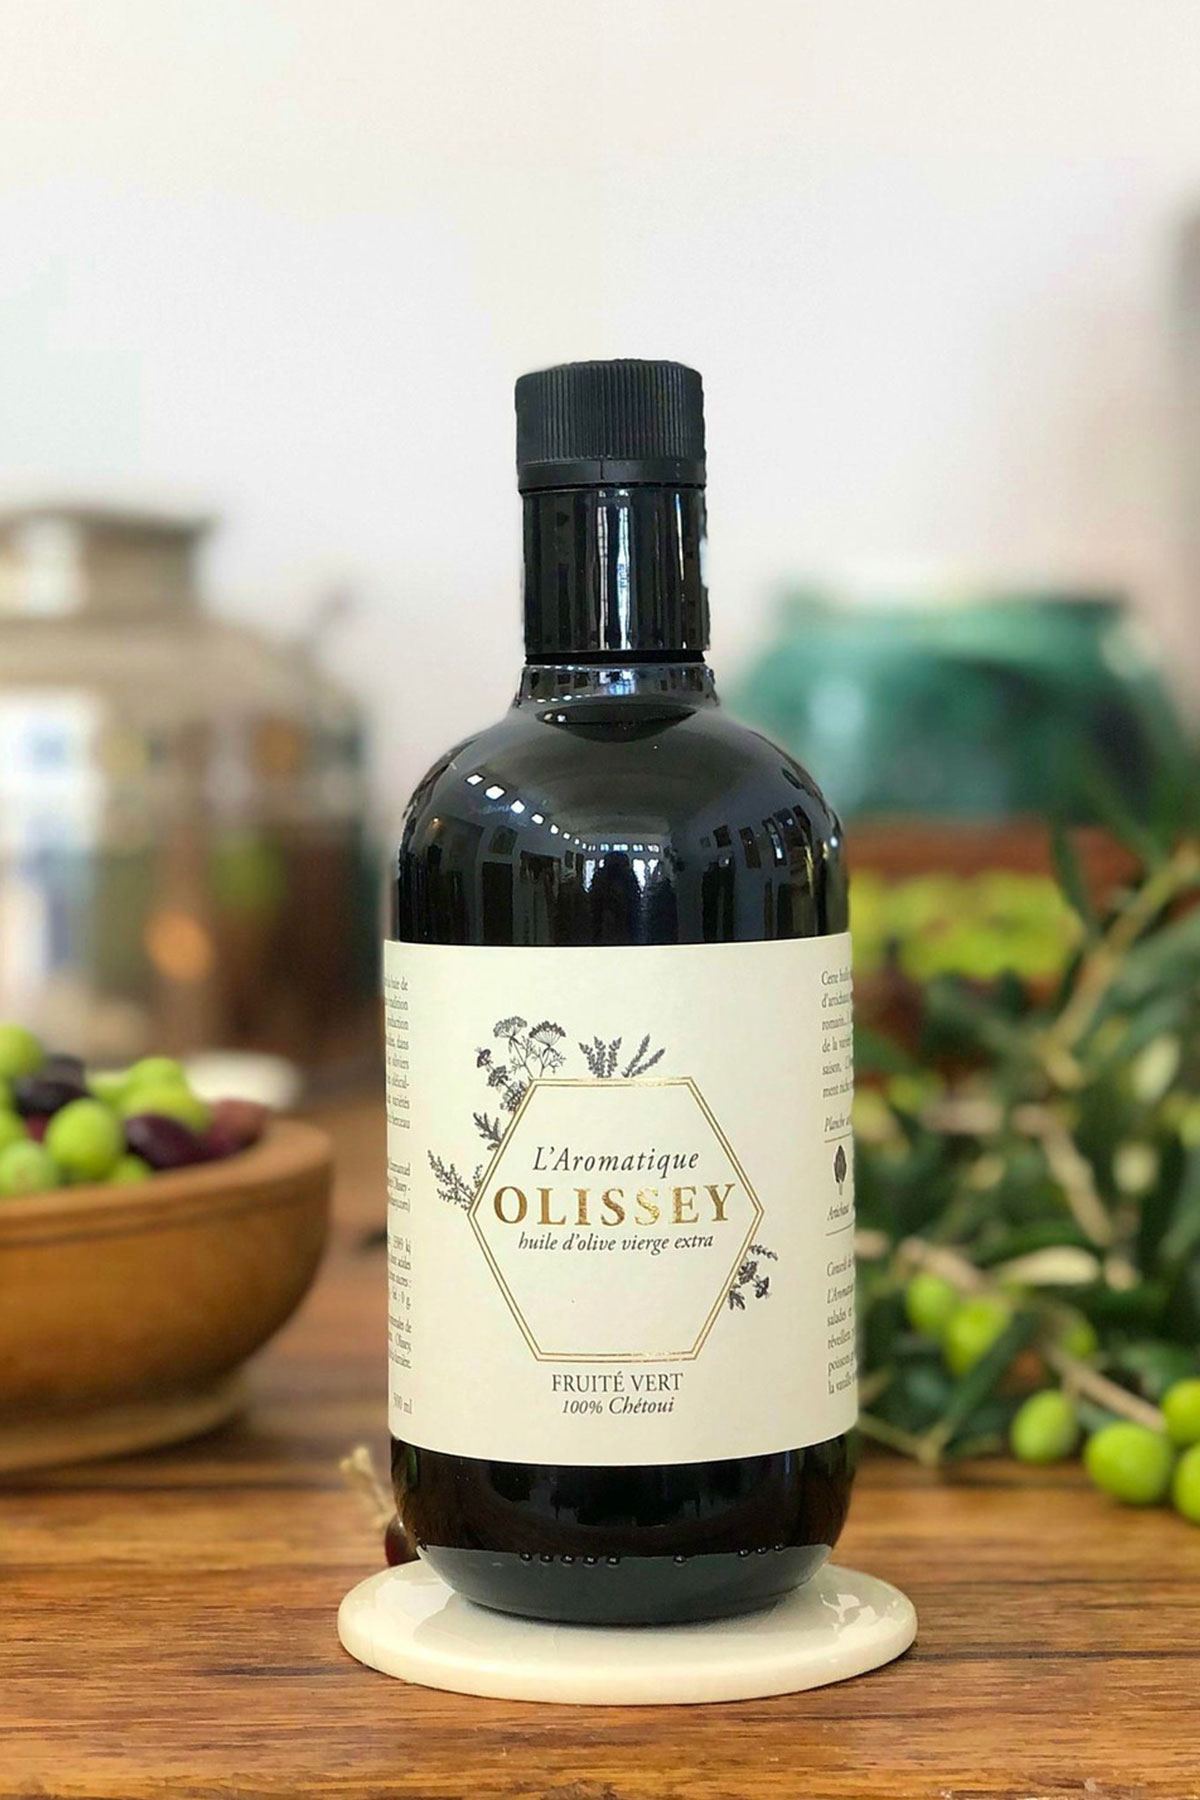 Olissey l'aromatique huile d'olive vierge extra